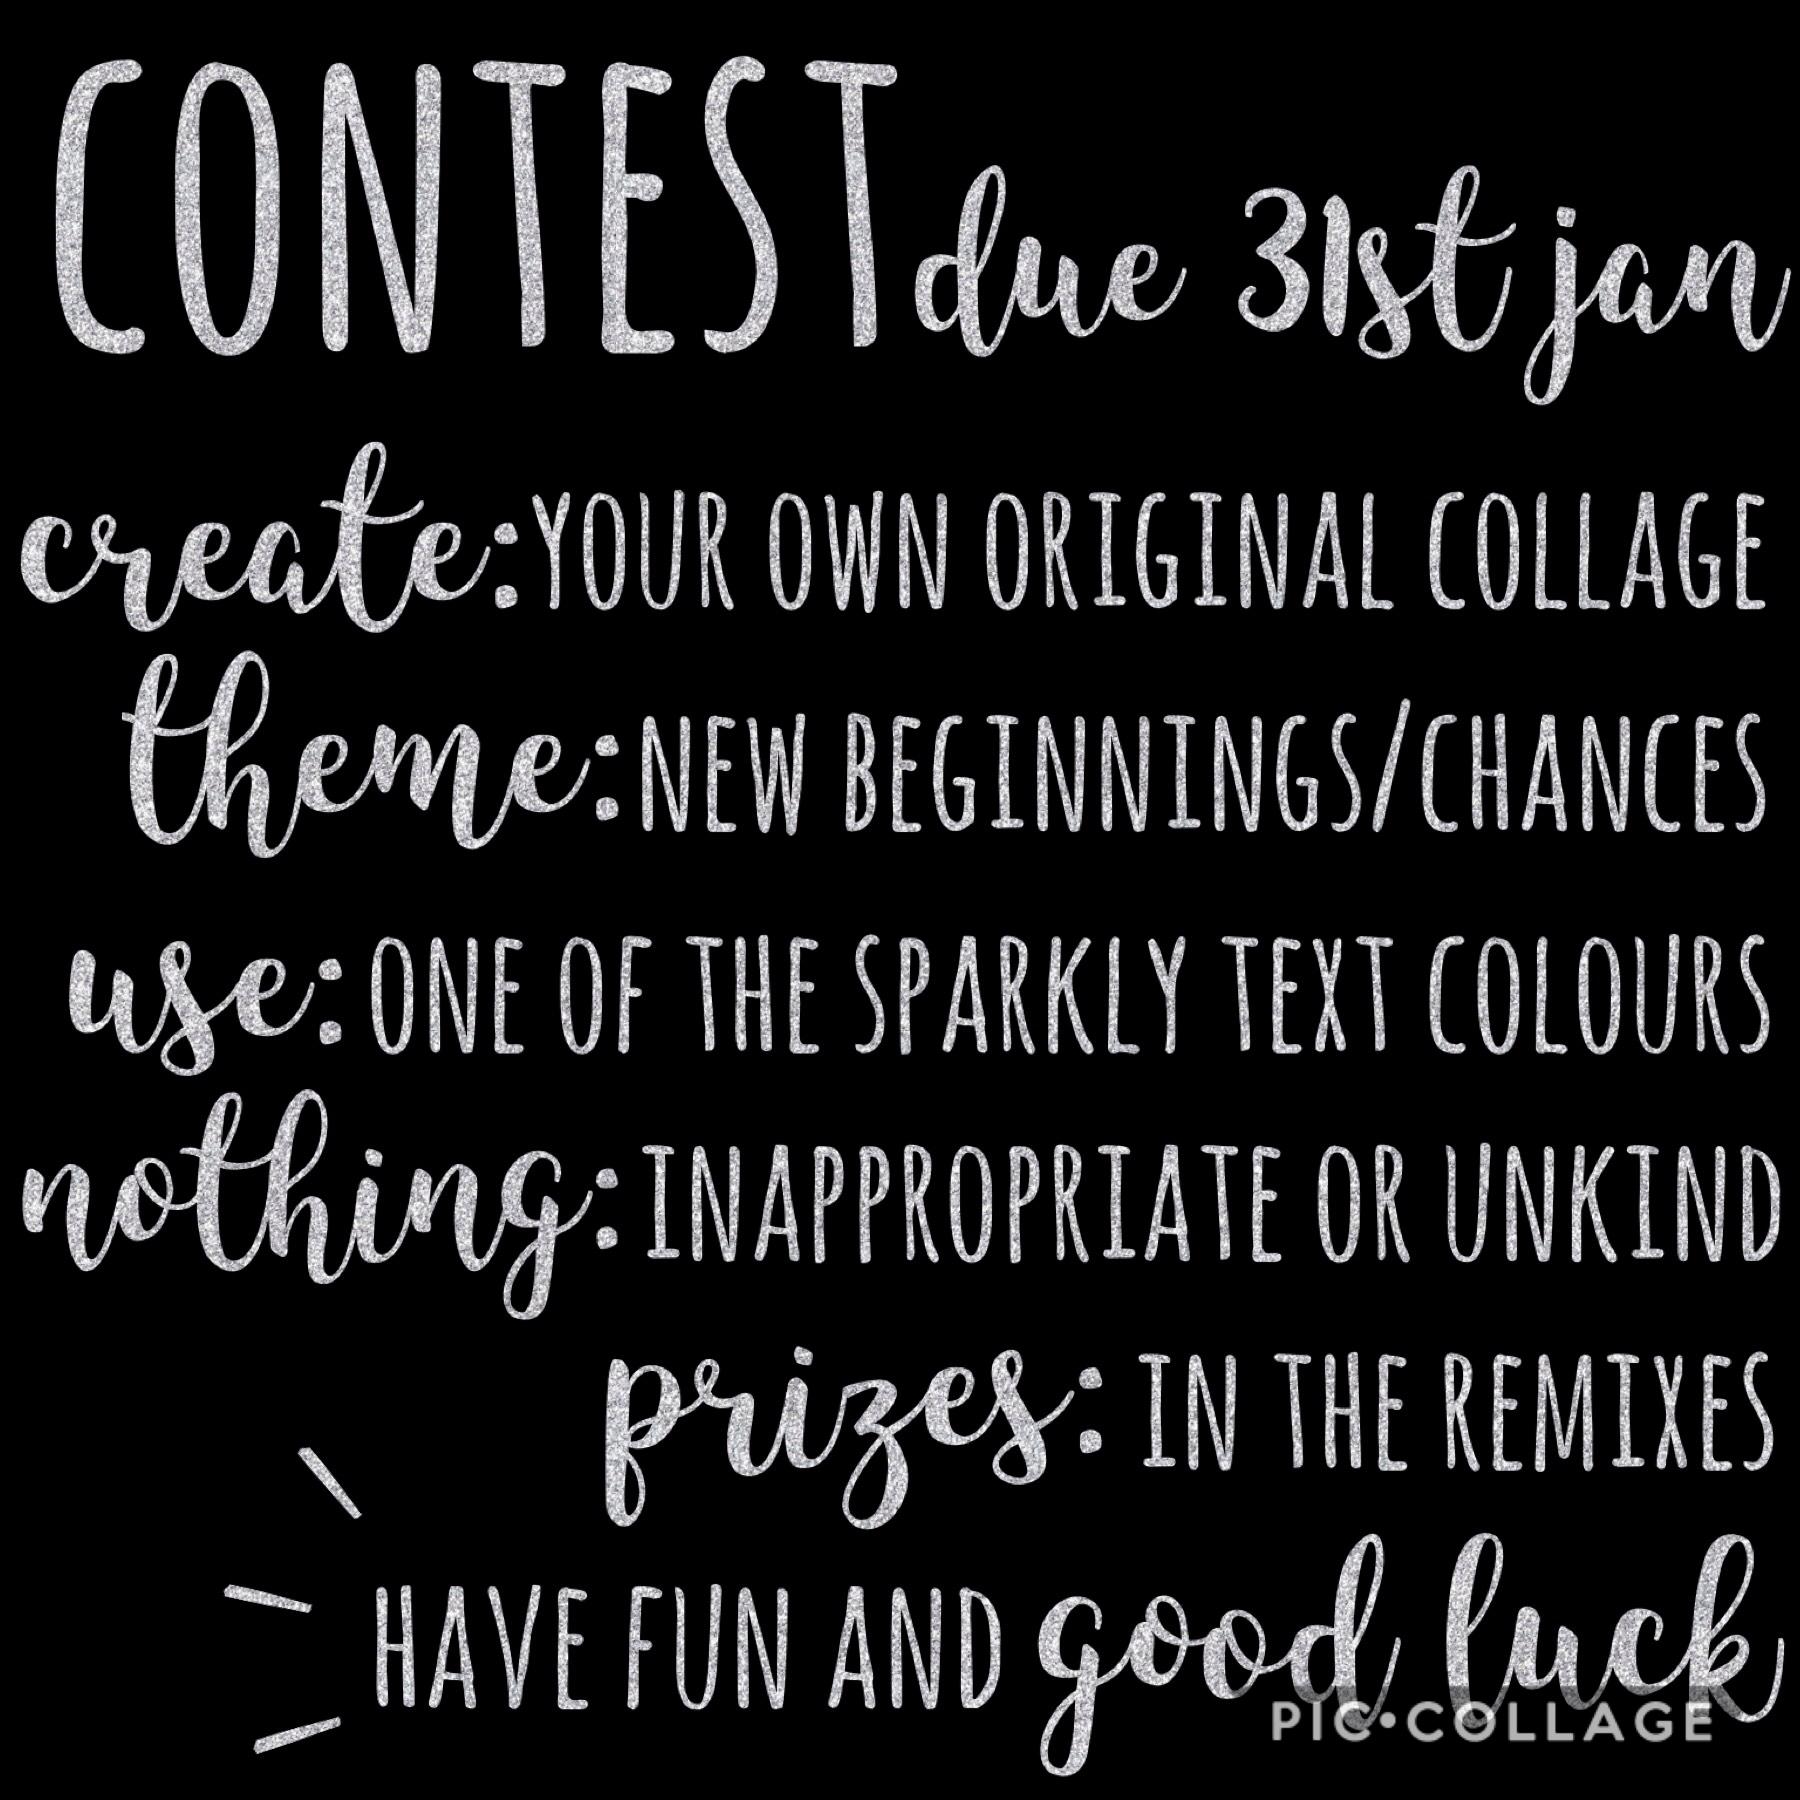 > contest <
check out the remixes for the prizes and also to find out how I'll be judging them!